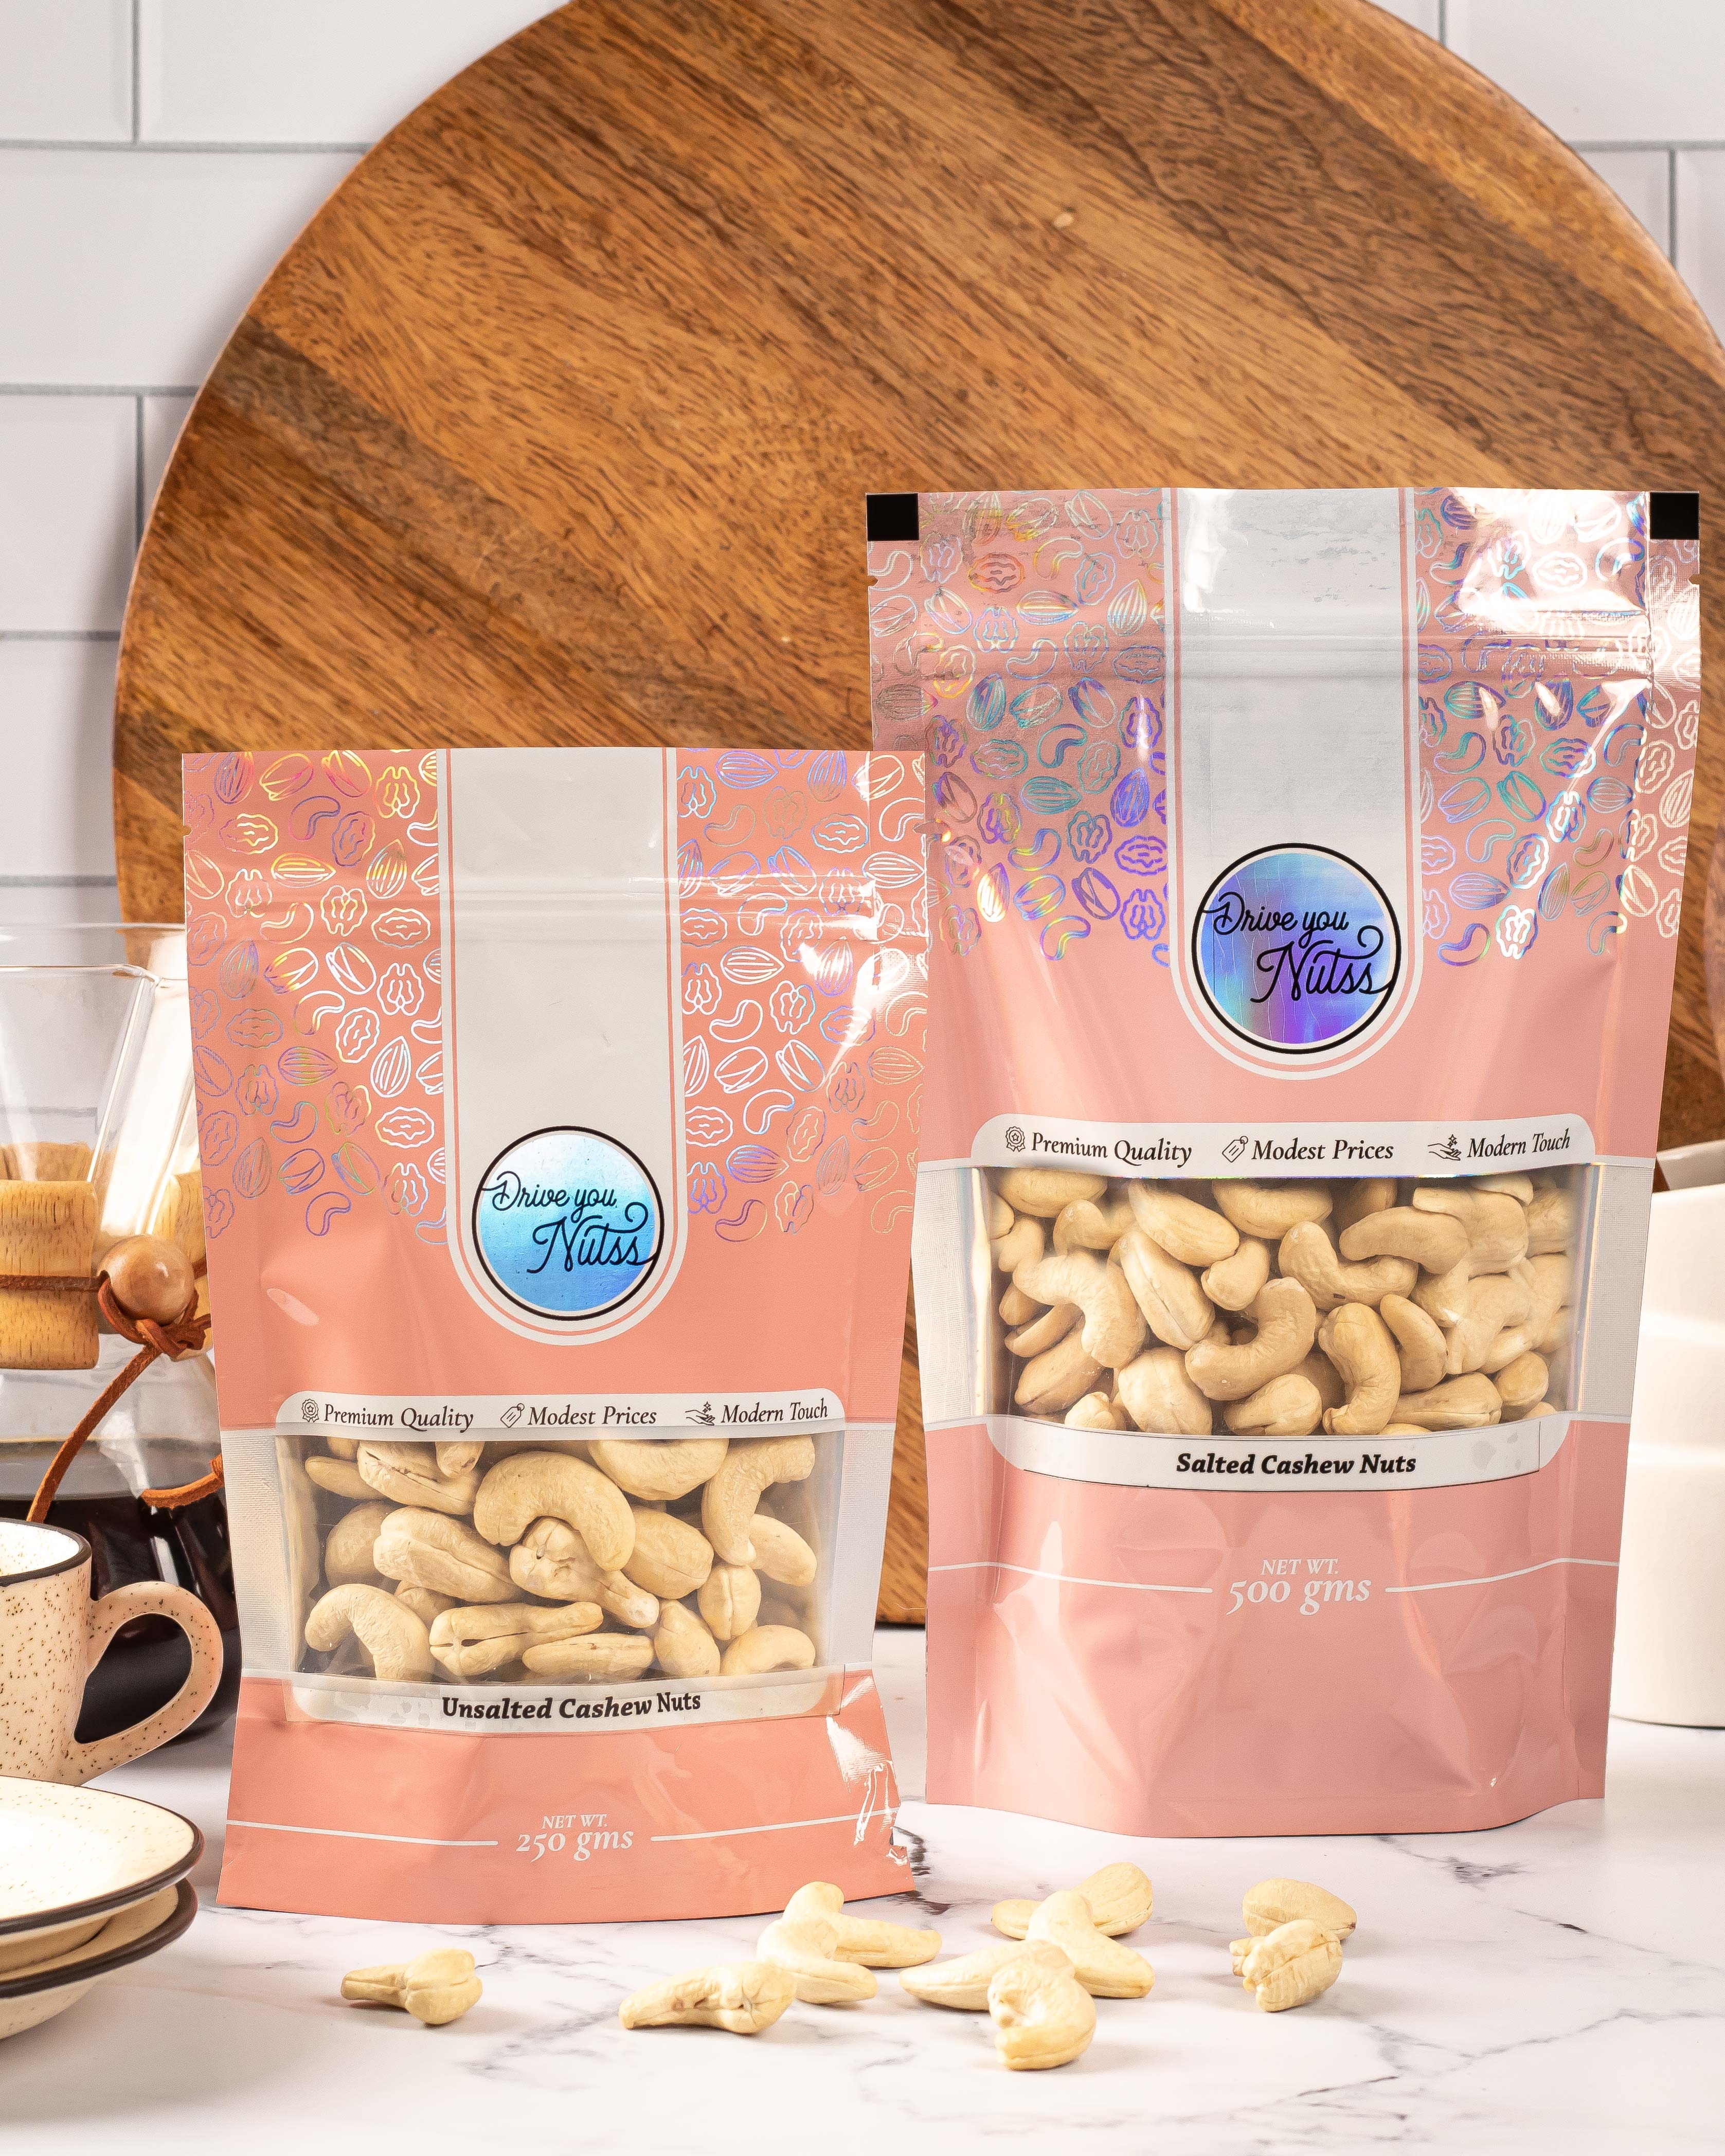 Unsalted Cashew Nuts (250 Gms)